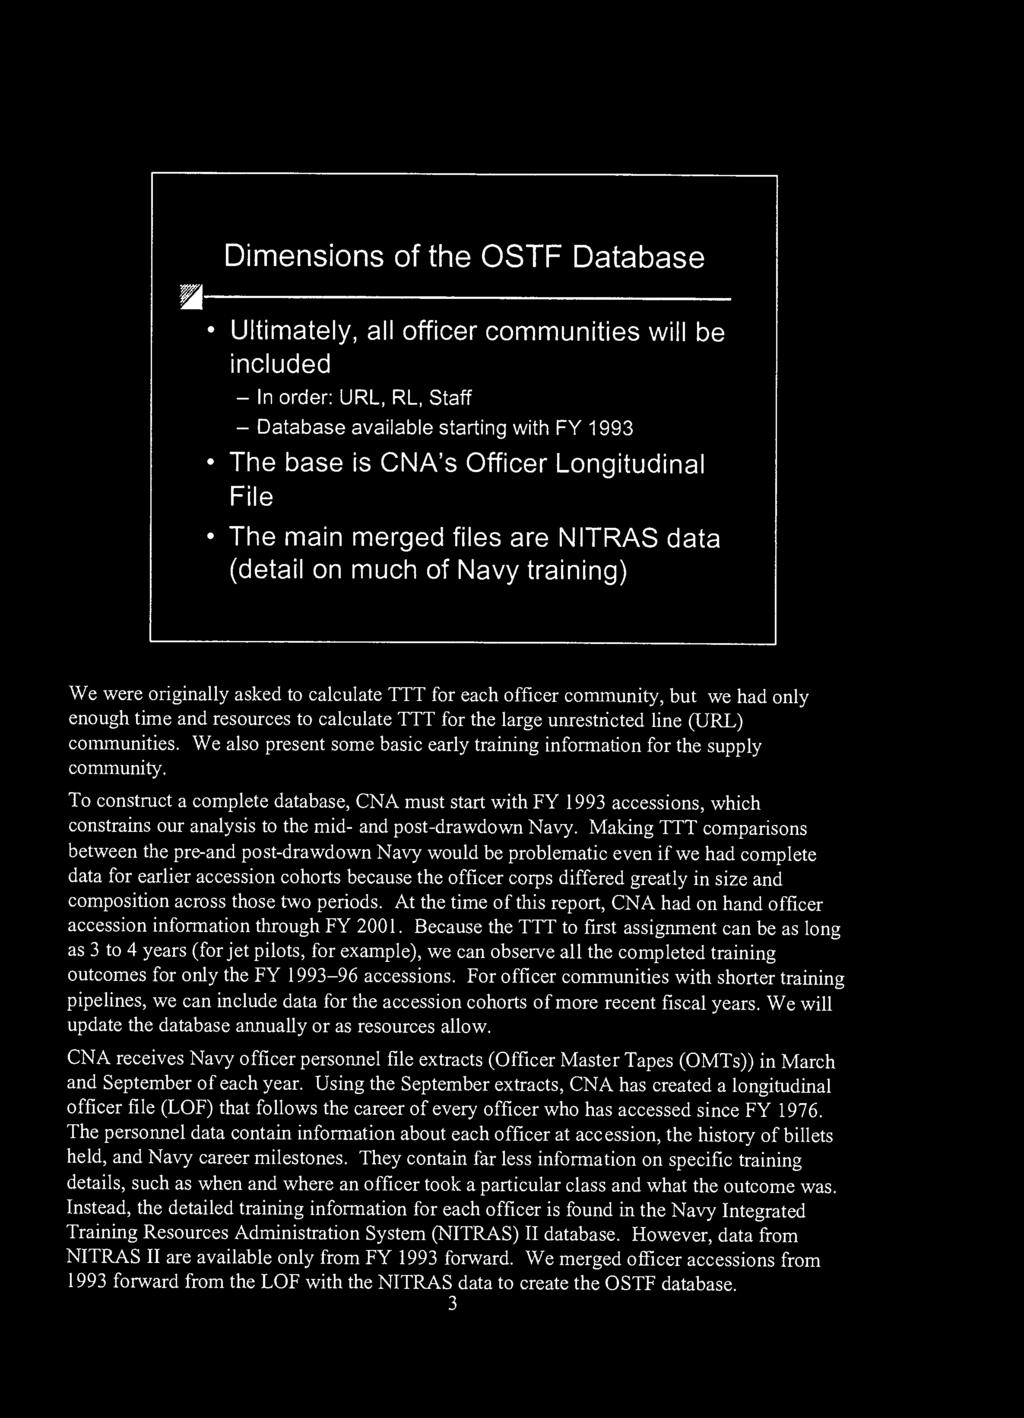 Dimensions of the OSTF Database m Ultimately, ail officer communities will be included - In order: URL, RL, Staff - Database available starting with FY 1993 The base is CNA's Officer Longitudinal